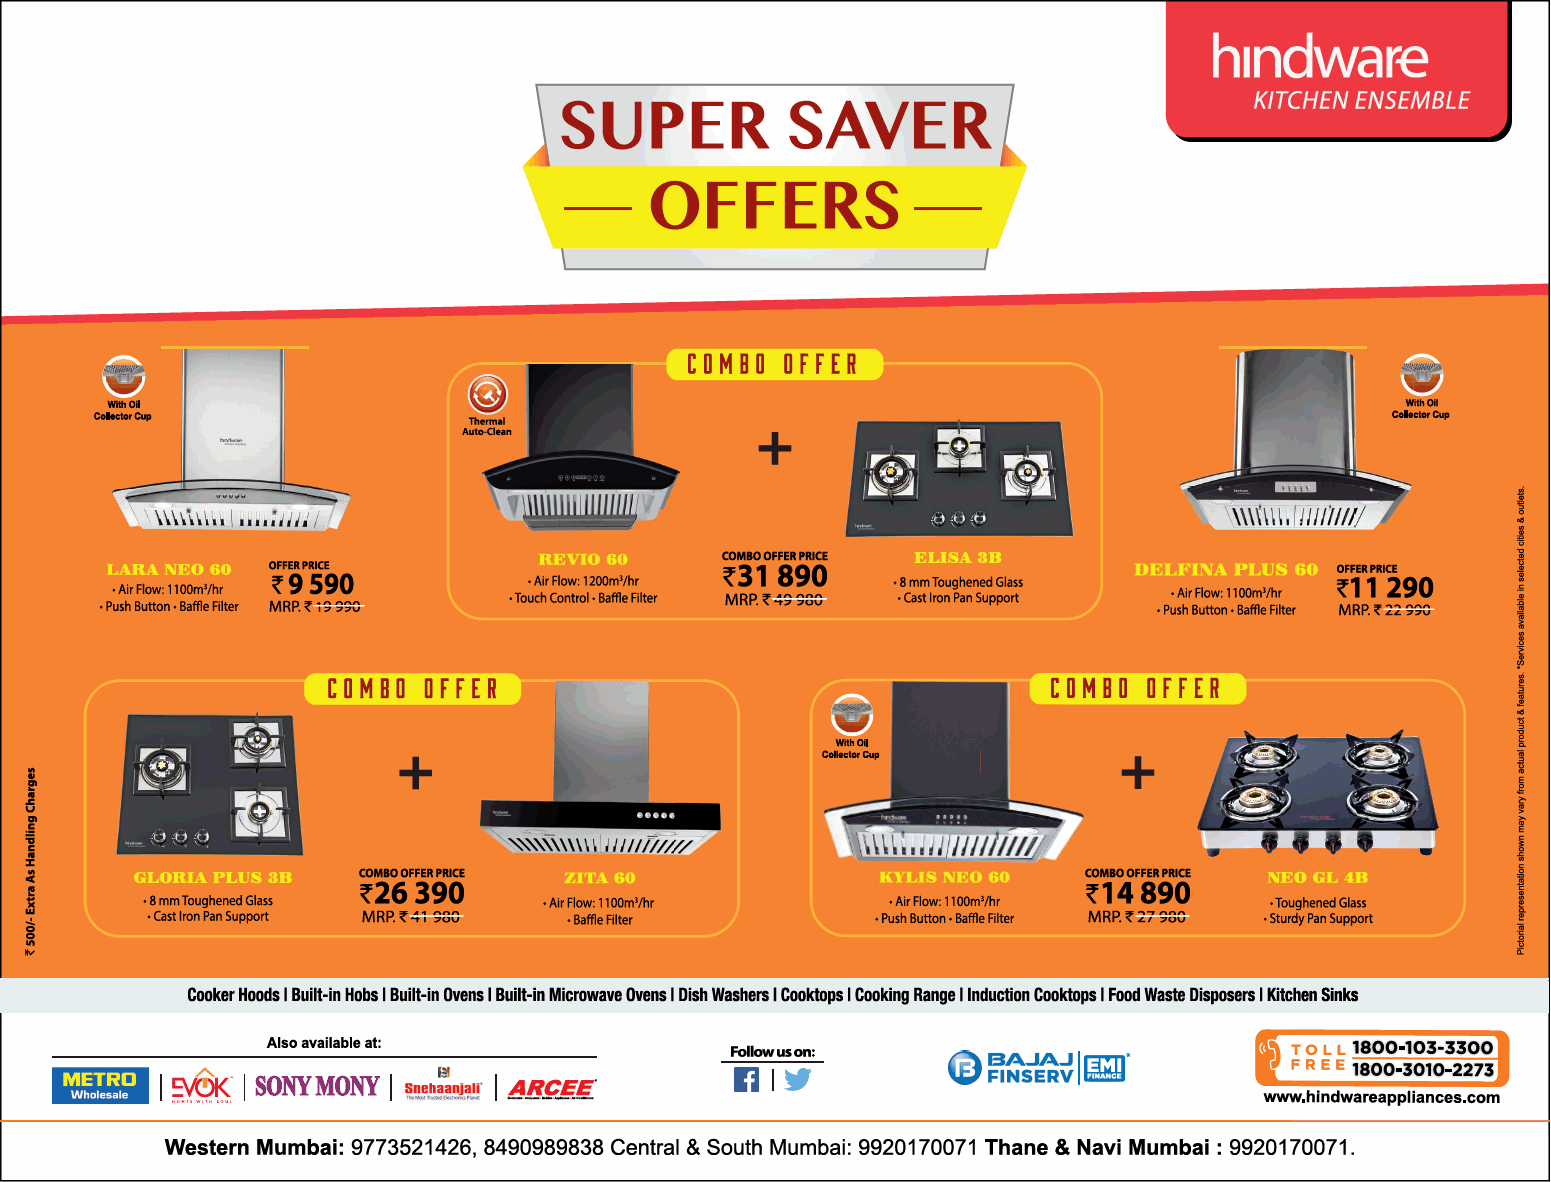 Hindware Super Saver Offers Combo Offer Ad - Advert Gallery